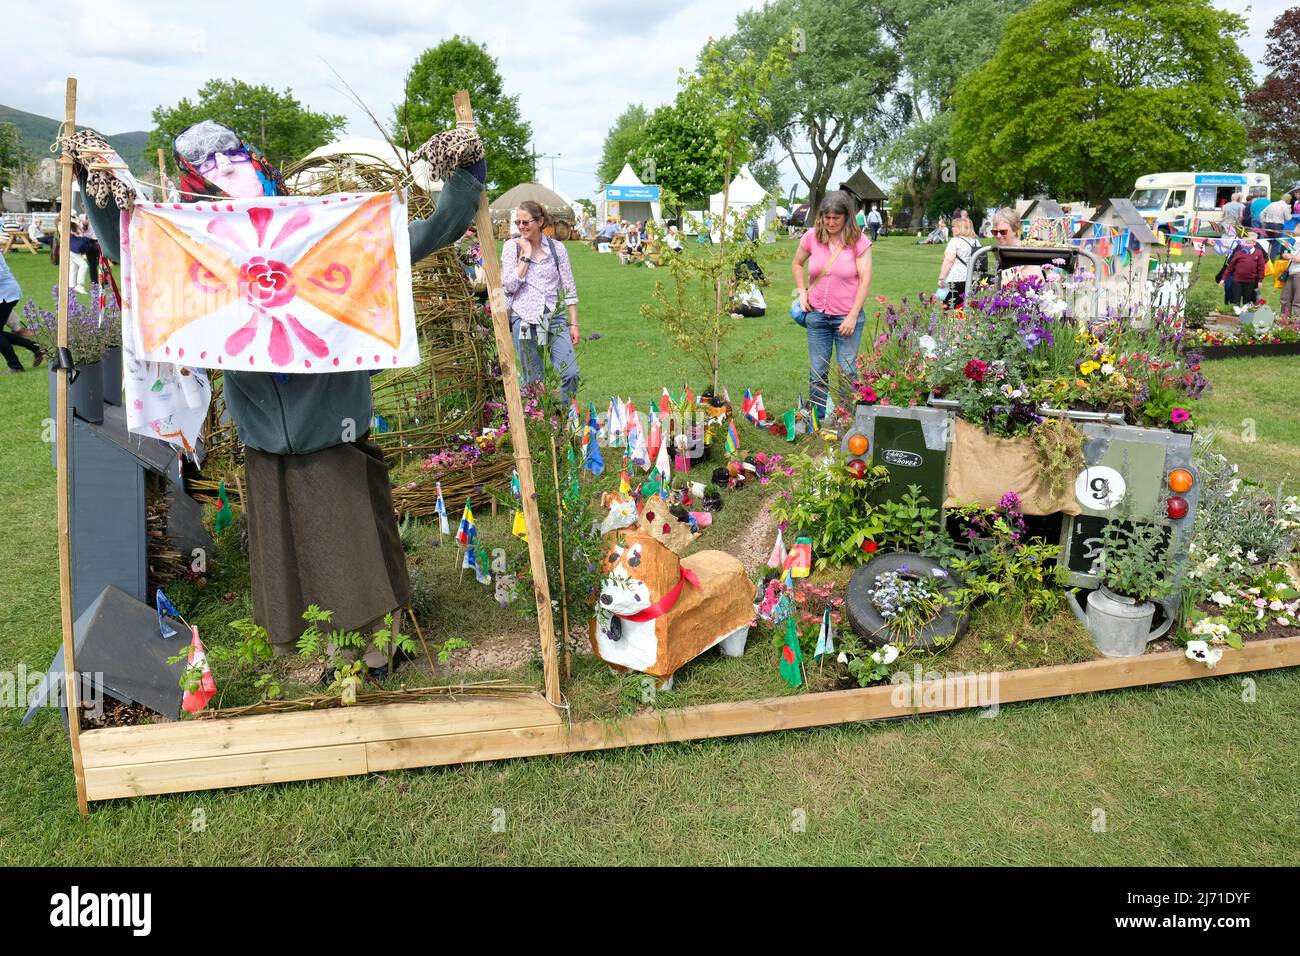 Malvern, Worcestershire, UK – Thursday 5th May 2022 – Visitors enjoy a garden design by local school children called Coronets, Crankshafts and Corgis in honour of the Platinum Jubilee on the opening day of the 35th RHS Malvern Spring Festival of gardening and plants. The show features six show gardens and a Platinum Jubilee Garden. Photo Steven May / Alamy Live News Stock Photo